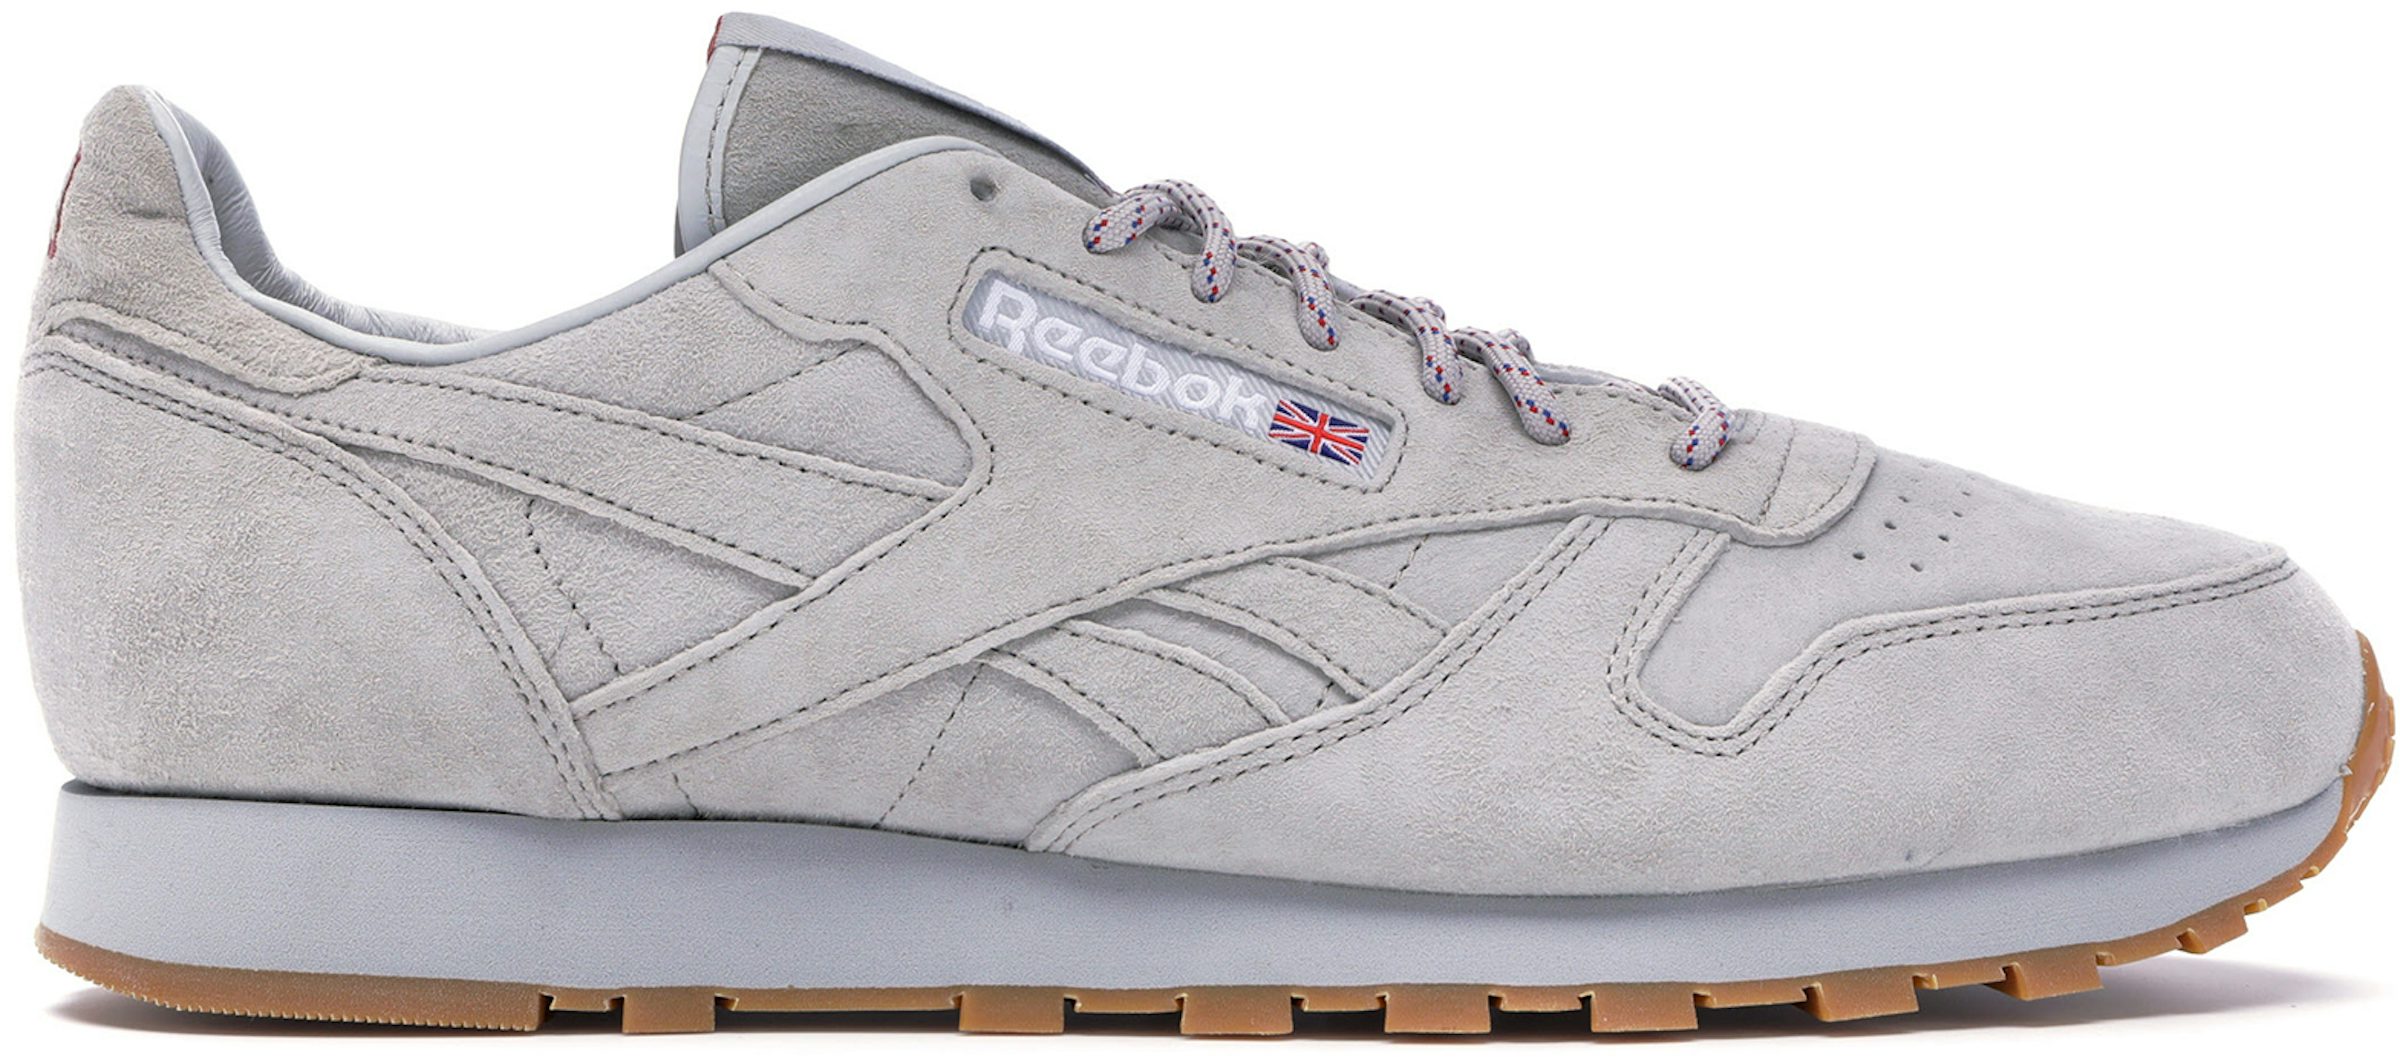 fout Lee in de buurt Reebok Classic Leather Kendrick Lamar Red and Blue Men's - AR0586 - US